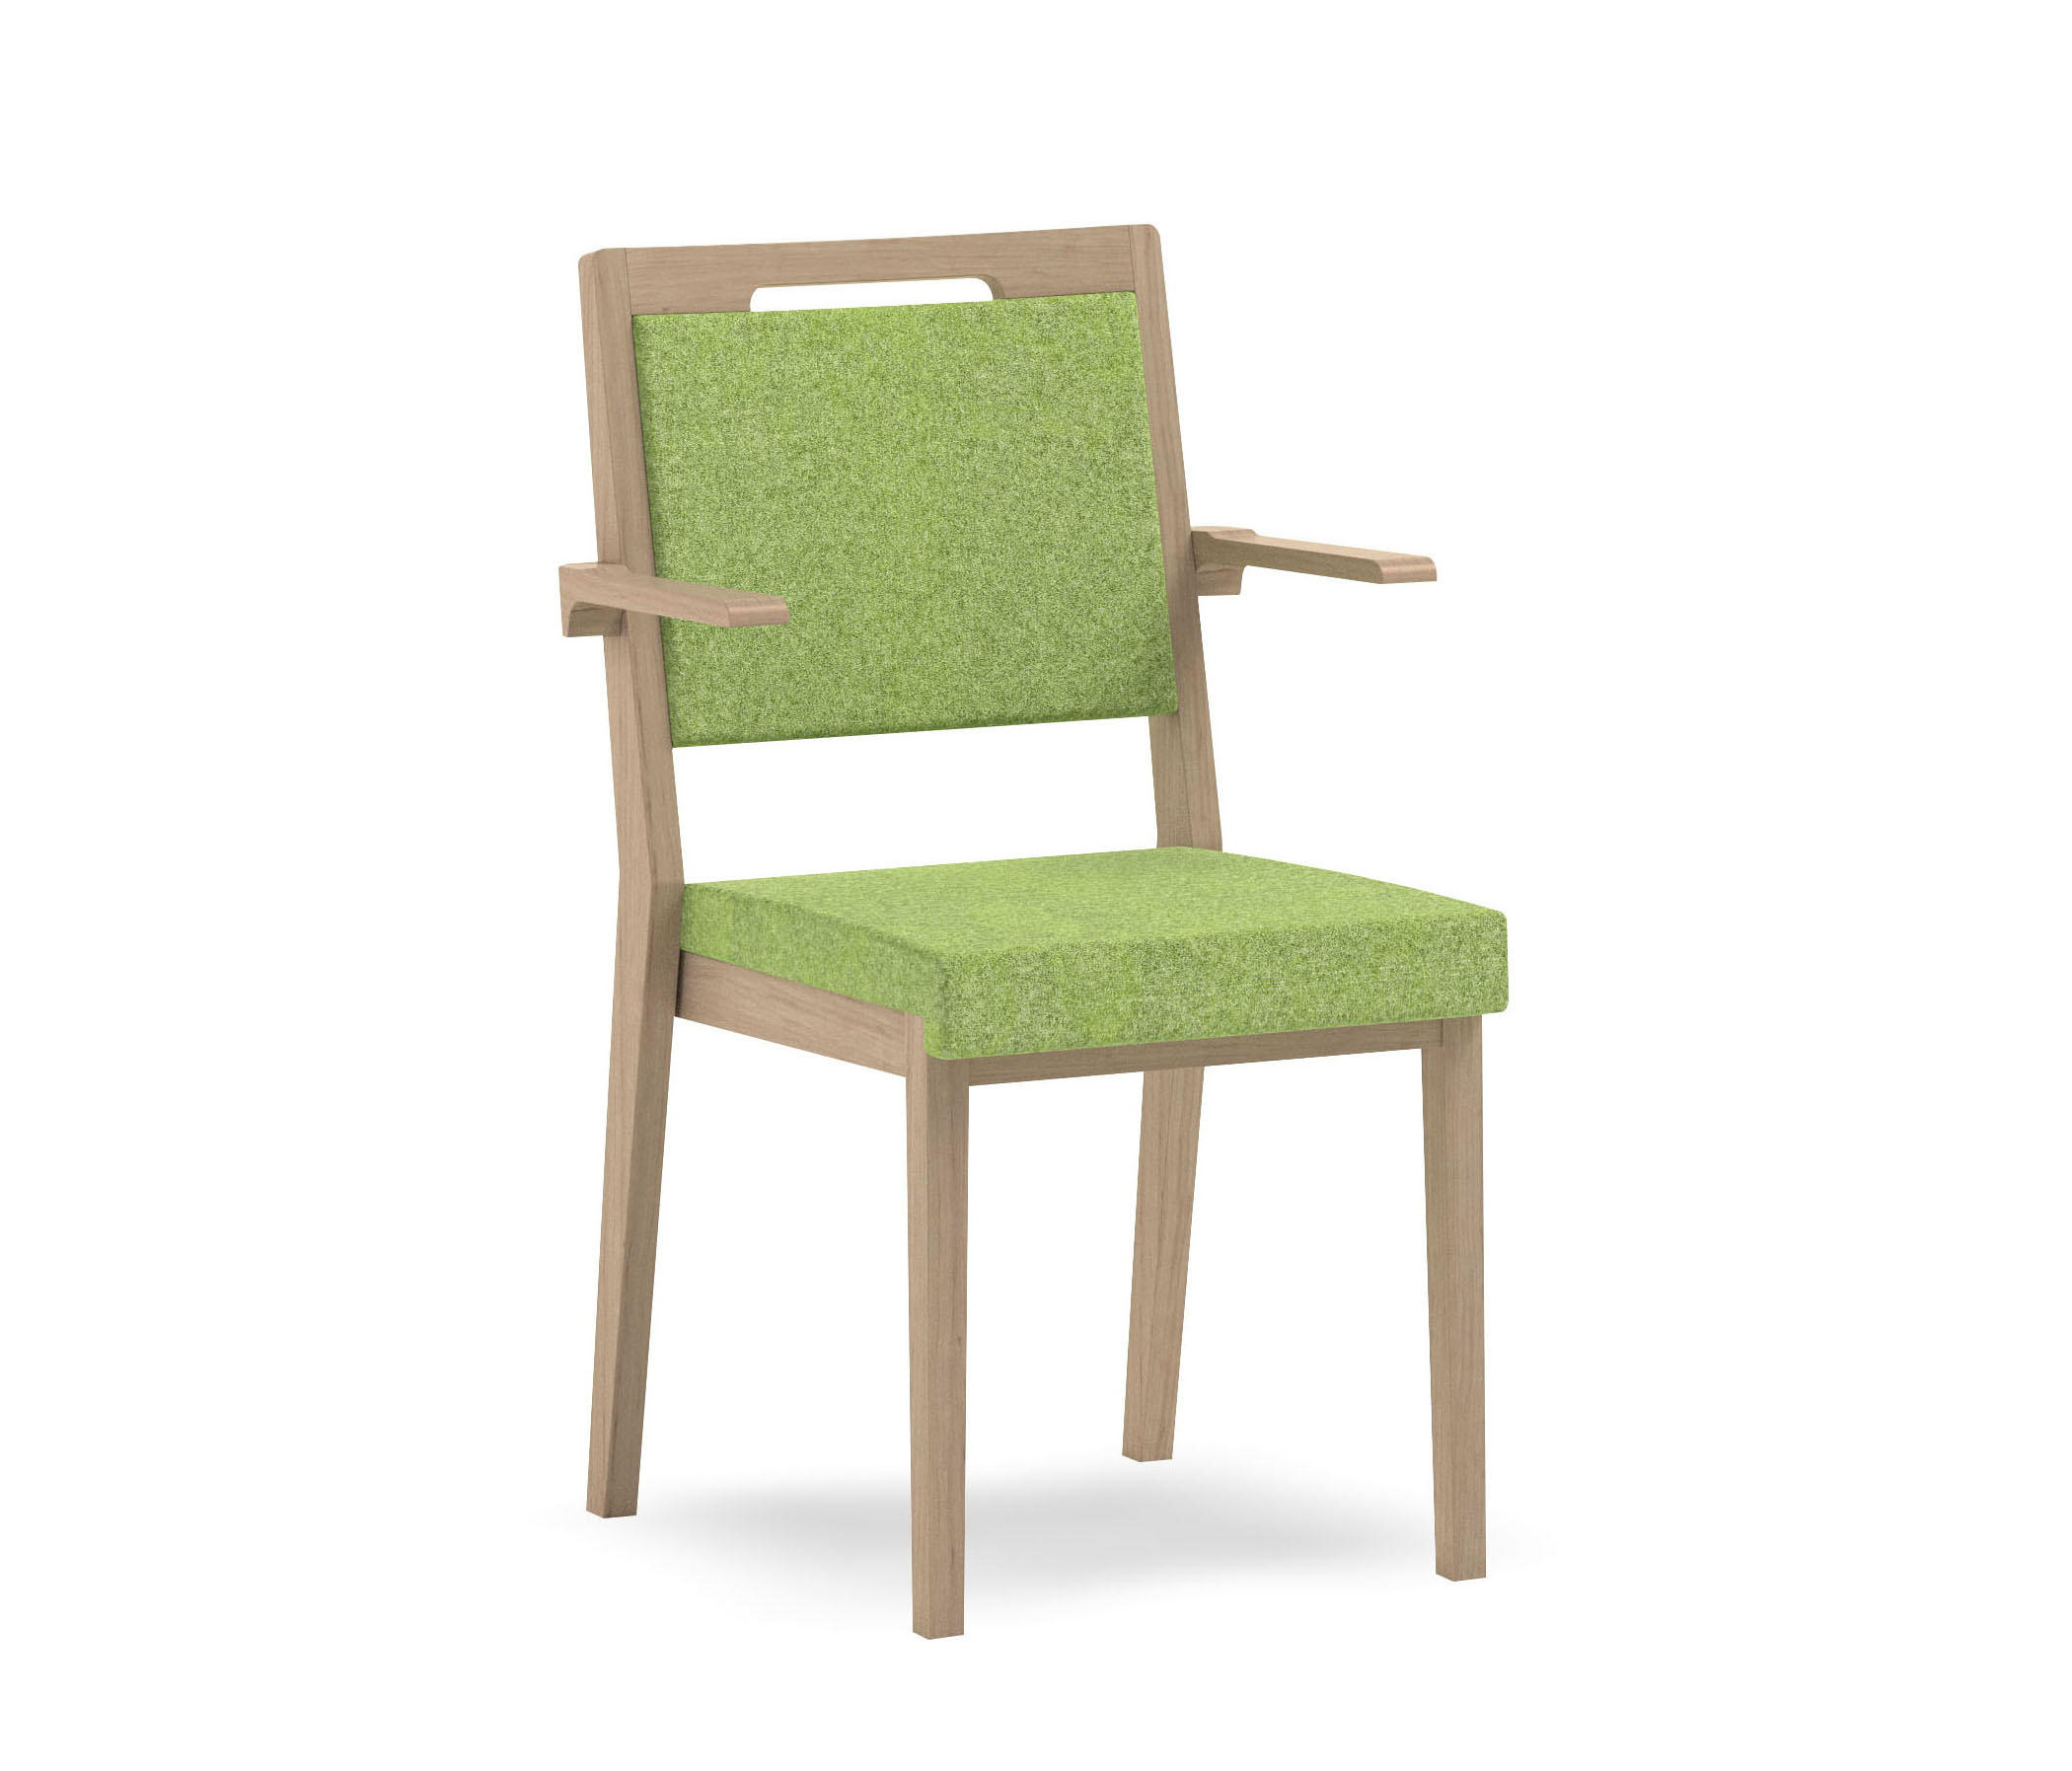 SWING_32-11/T6 - Chairs from Piaval | Architonic